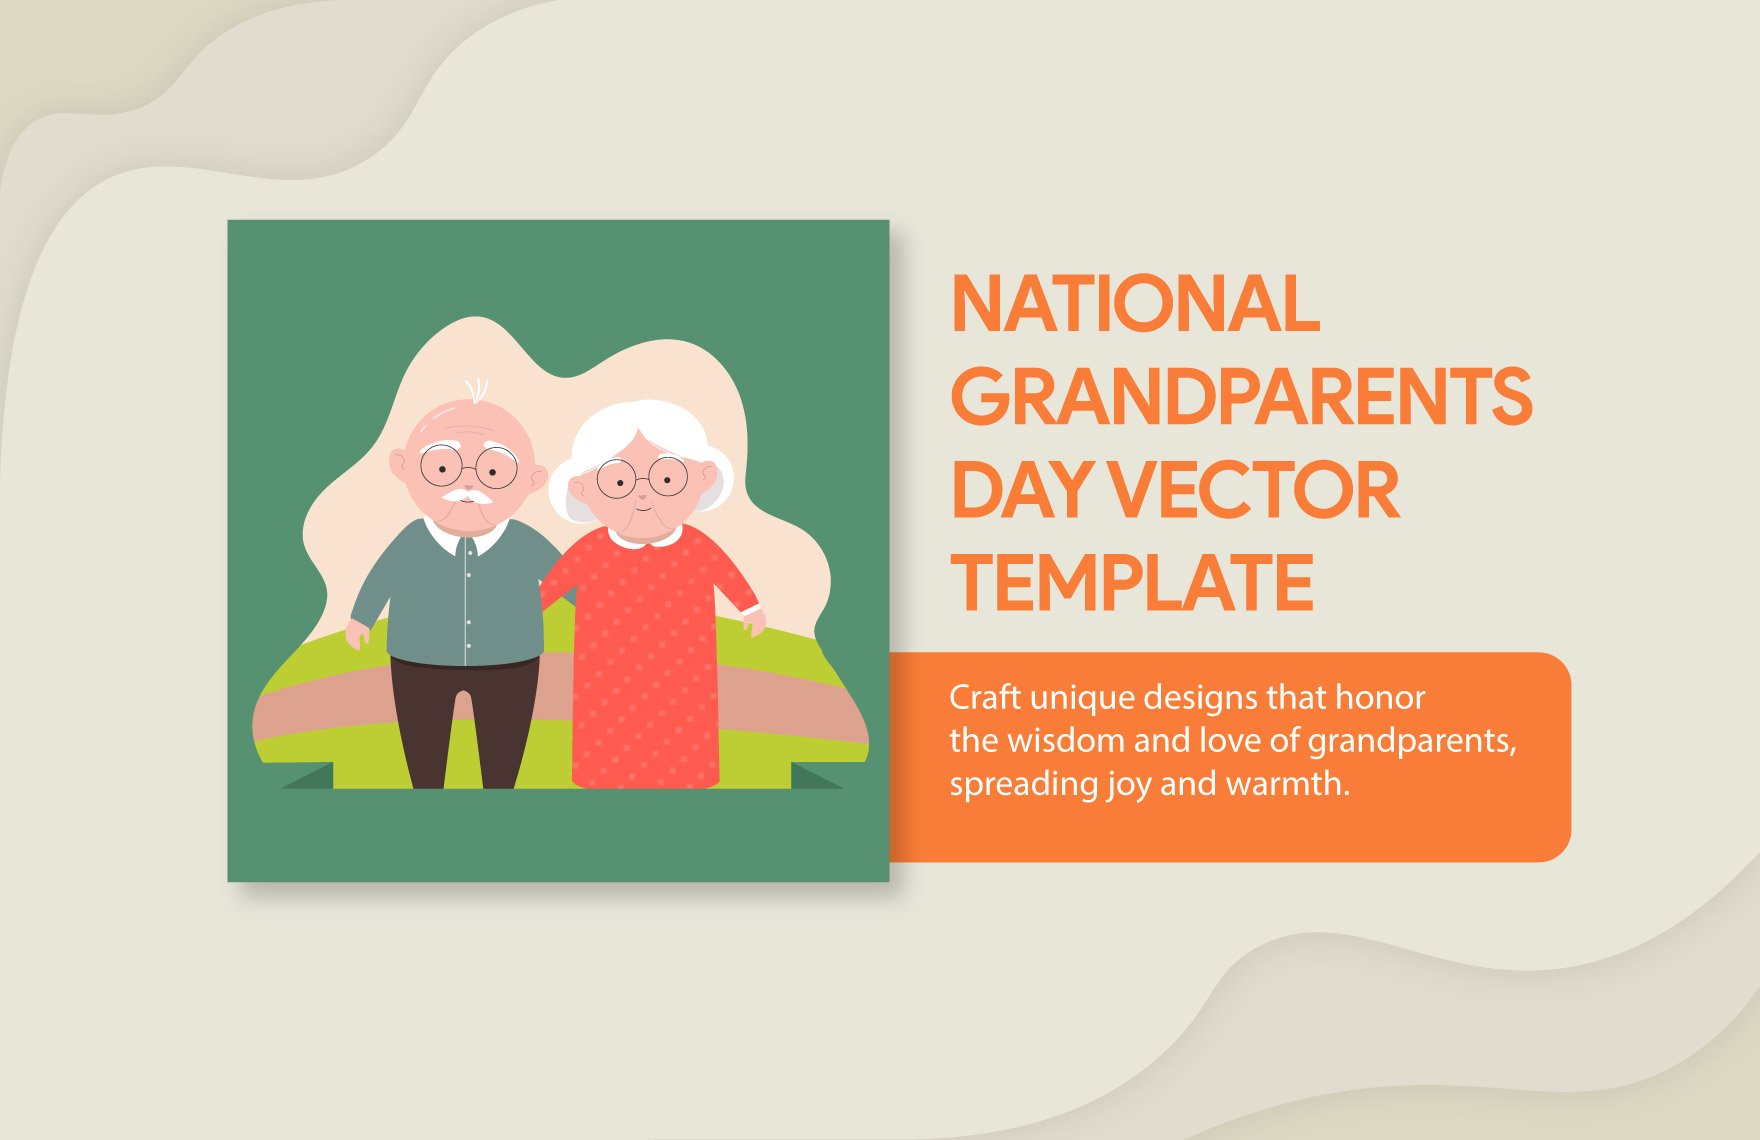 National Grandparents Day Vector